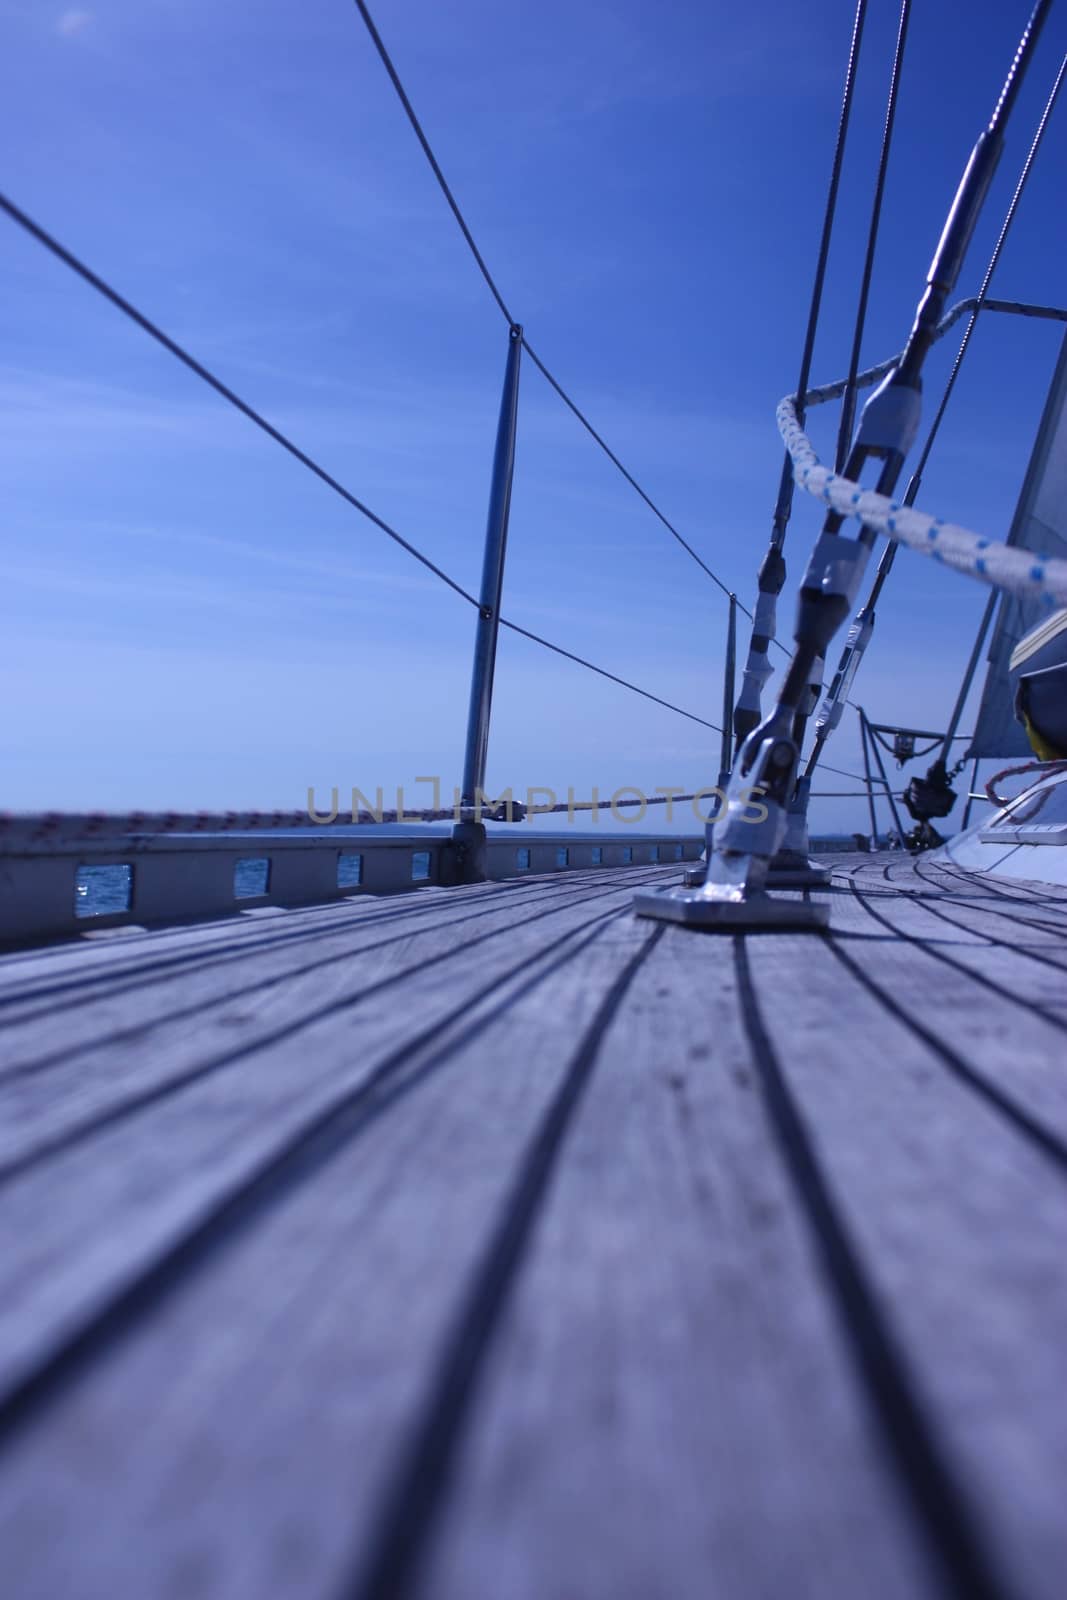 The curved teak deck of a yacht sailing at sea by chrisga